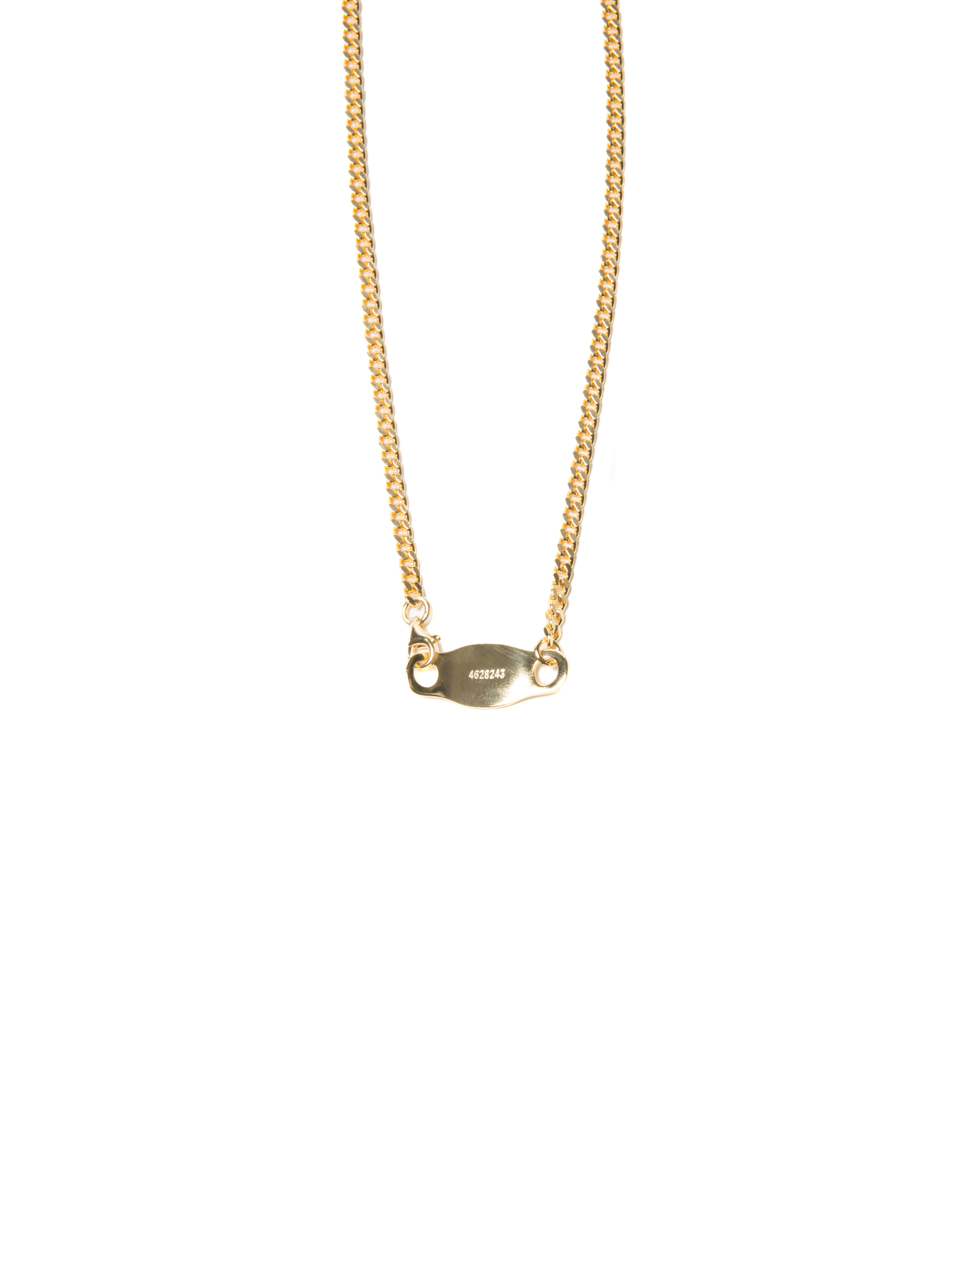 COOTIE (クーティー) Raza Necklace Gold-